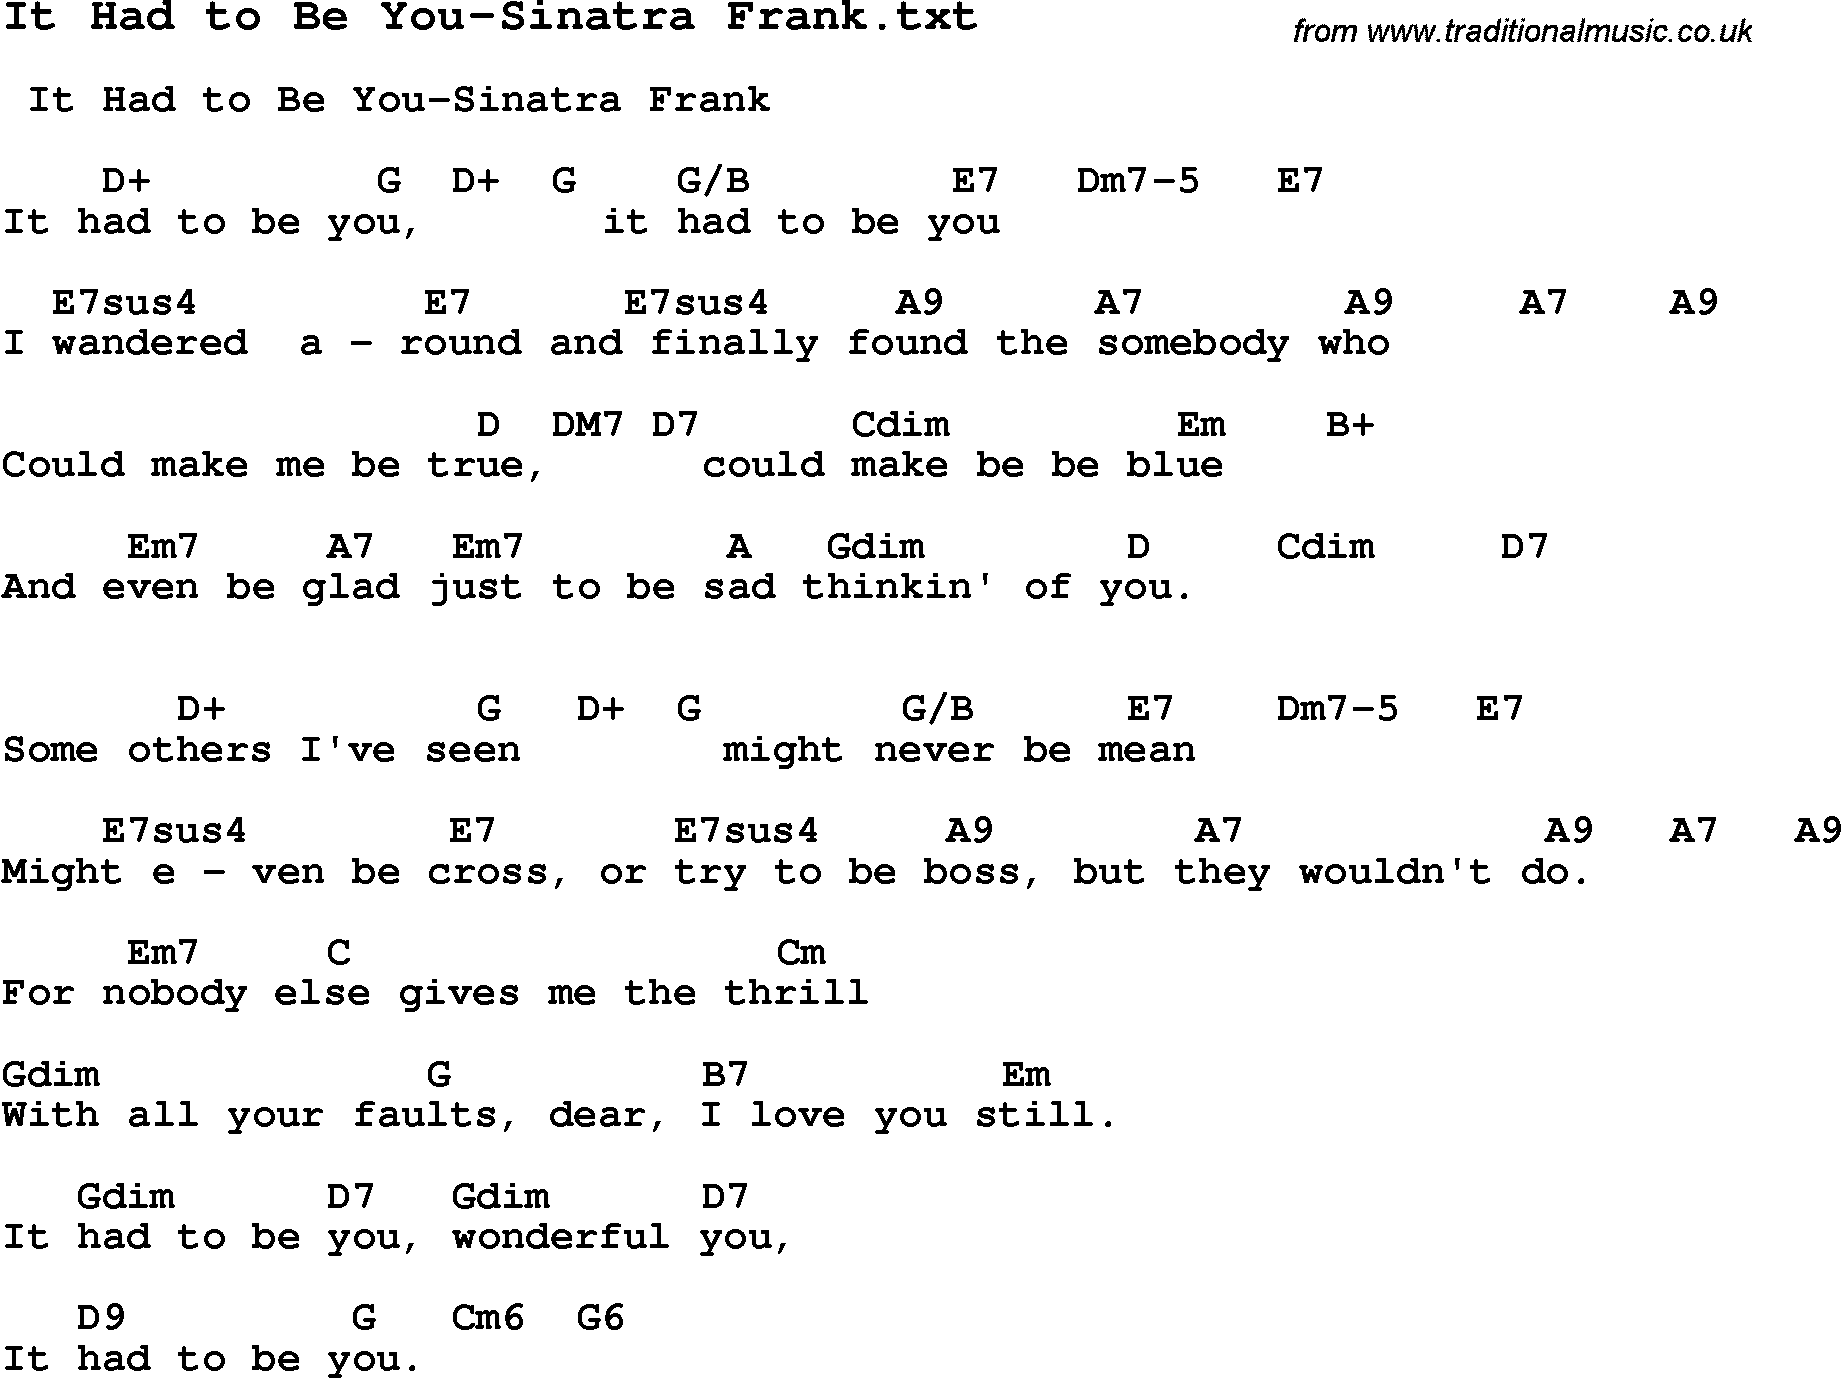 Jazz Song from top bands and vocal artists with chords, tabs and lyrics - It Had to Be You-Sinatra Frank